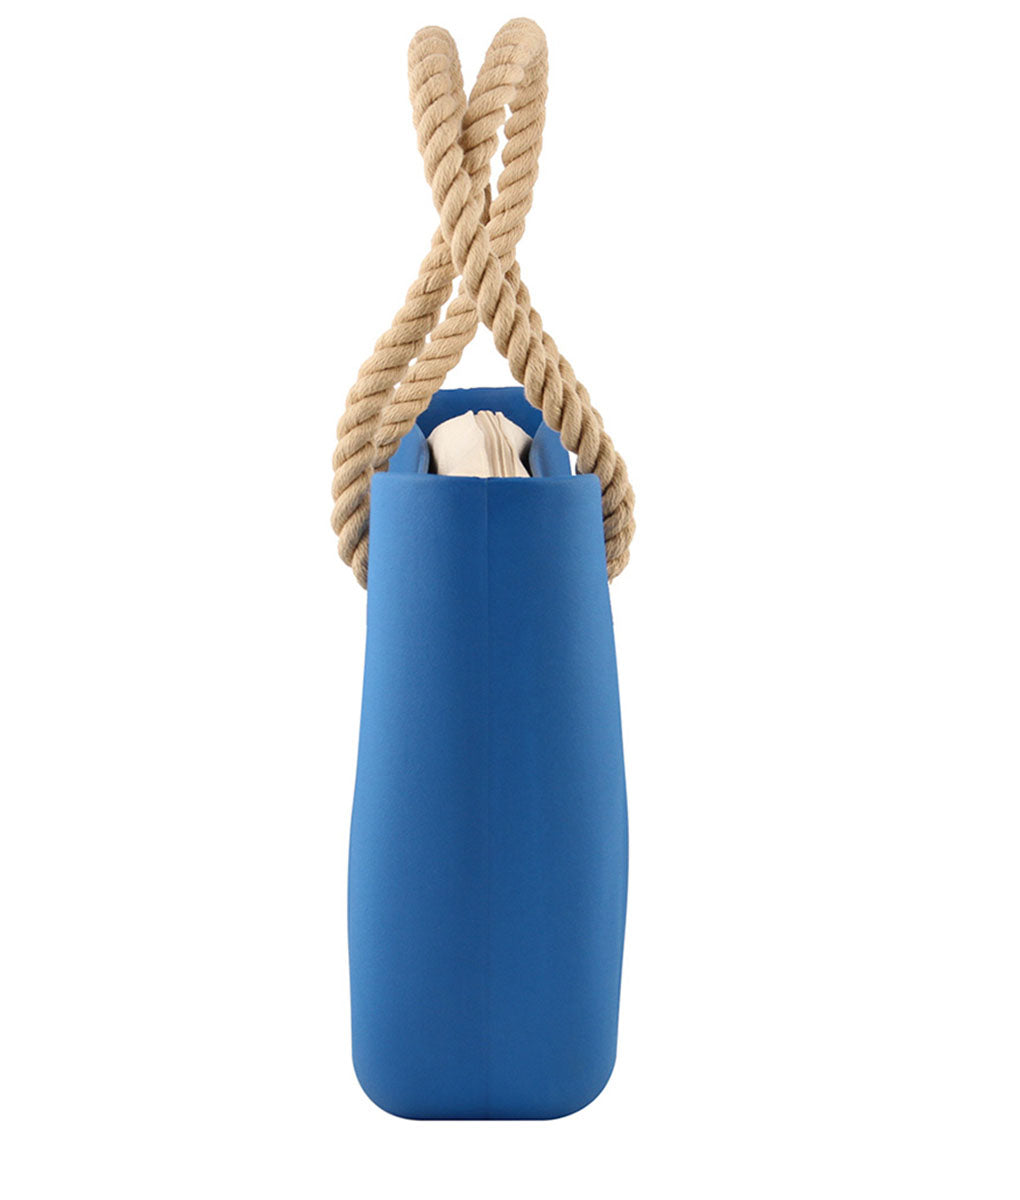 Original BLUE with beige canvas inner and rope handles